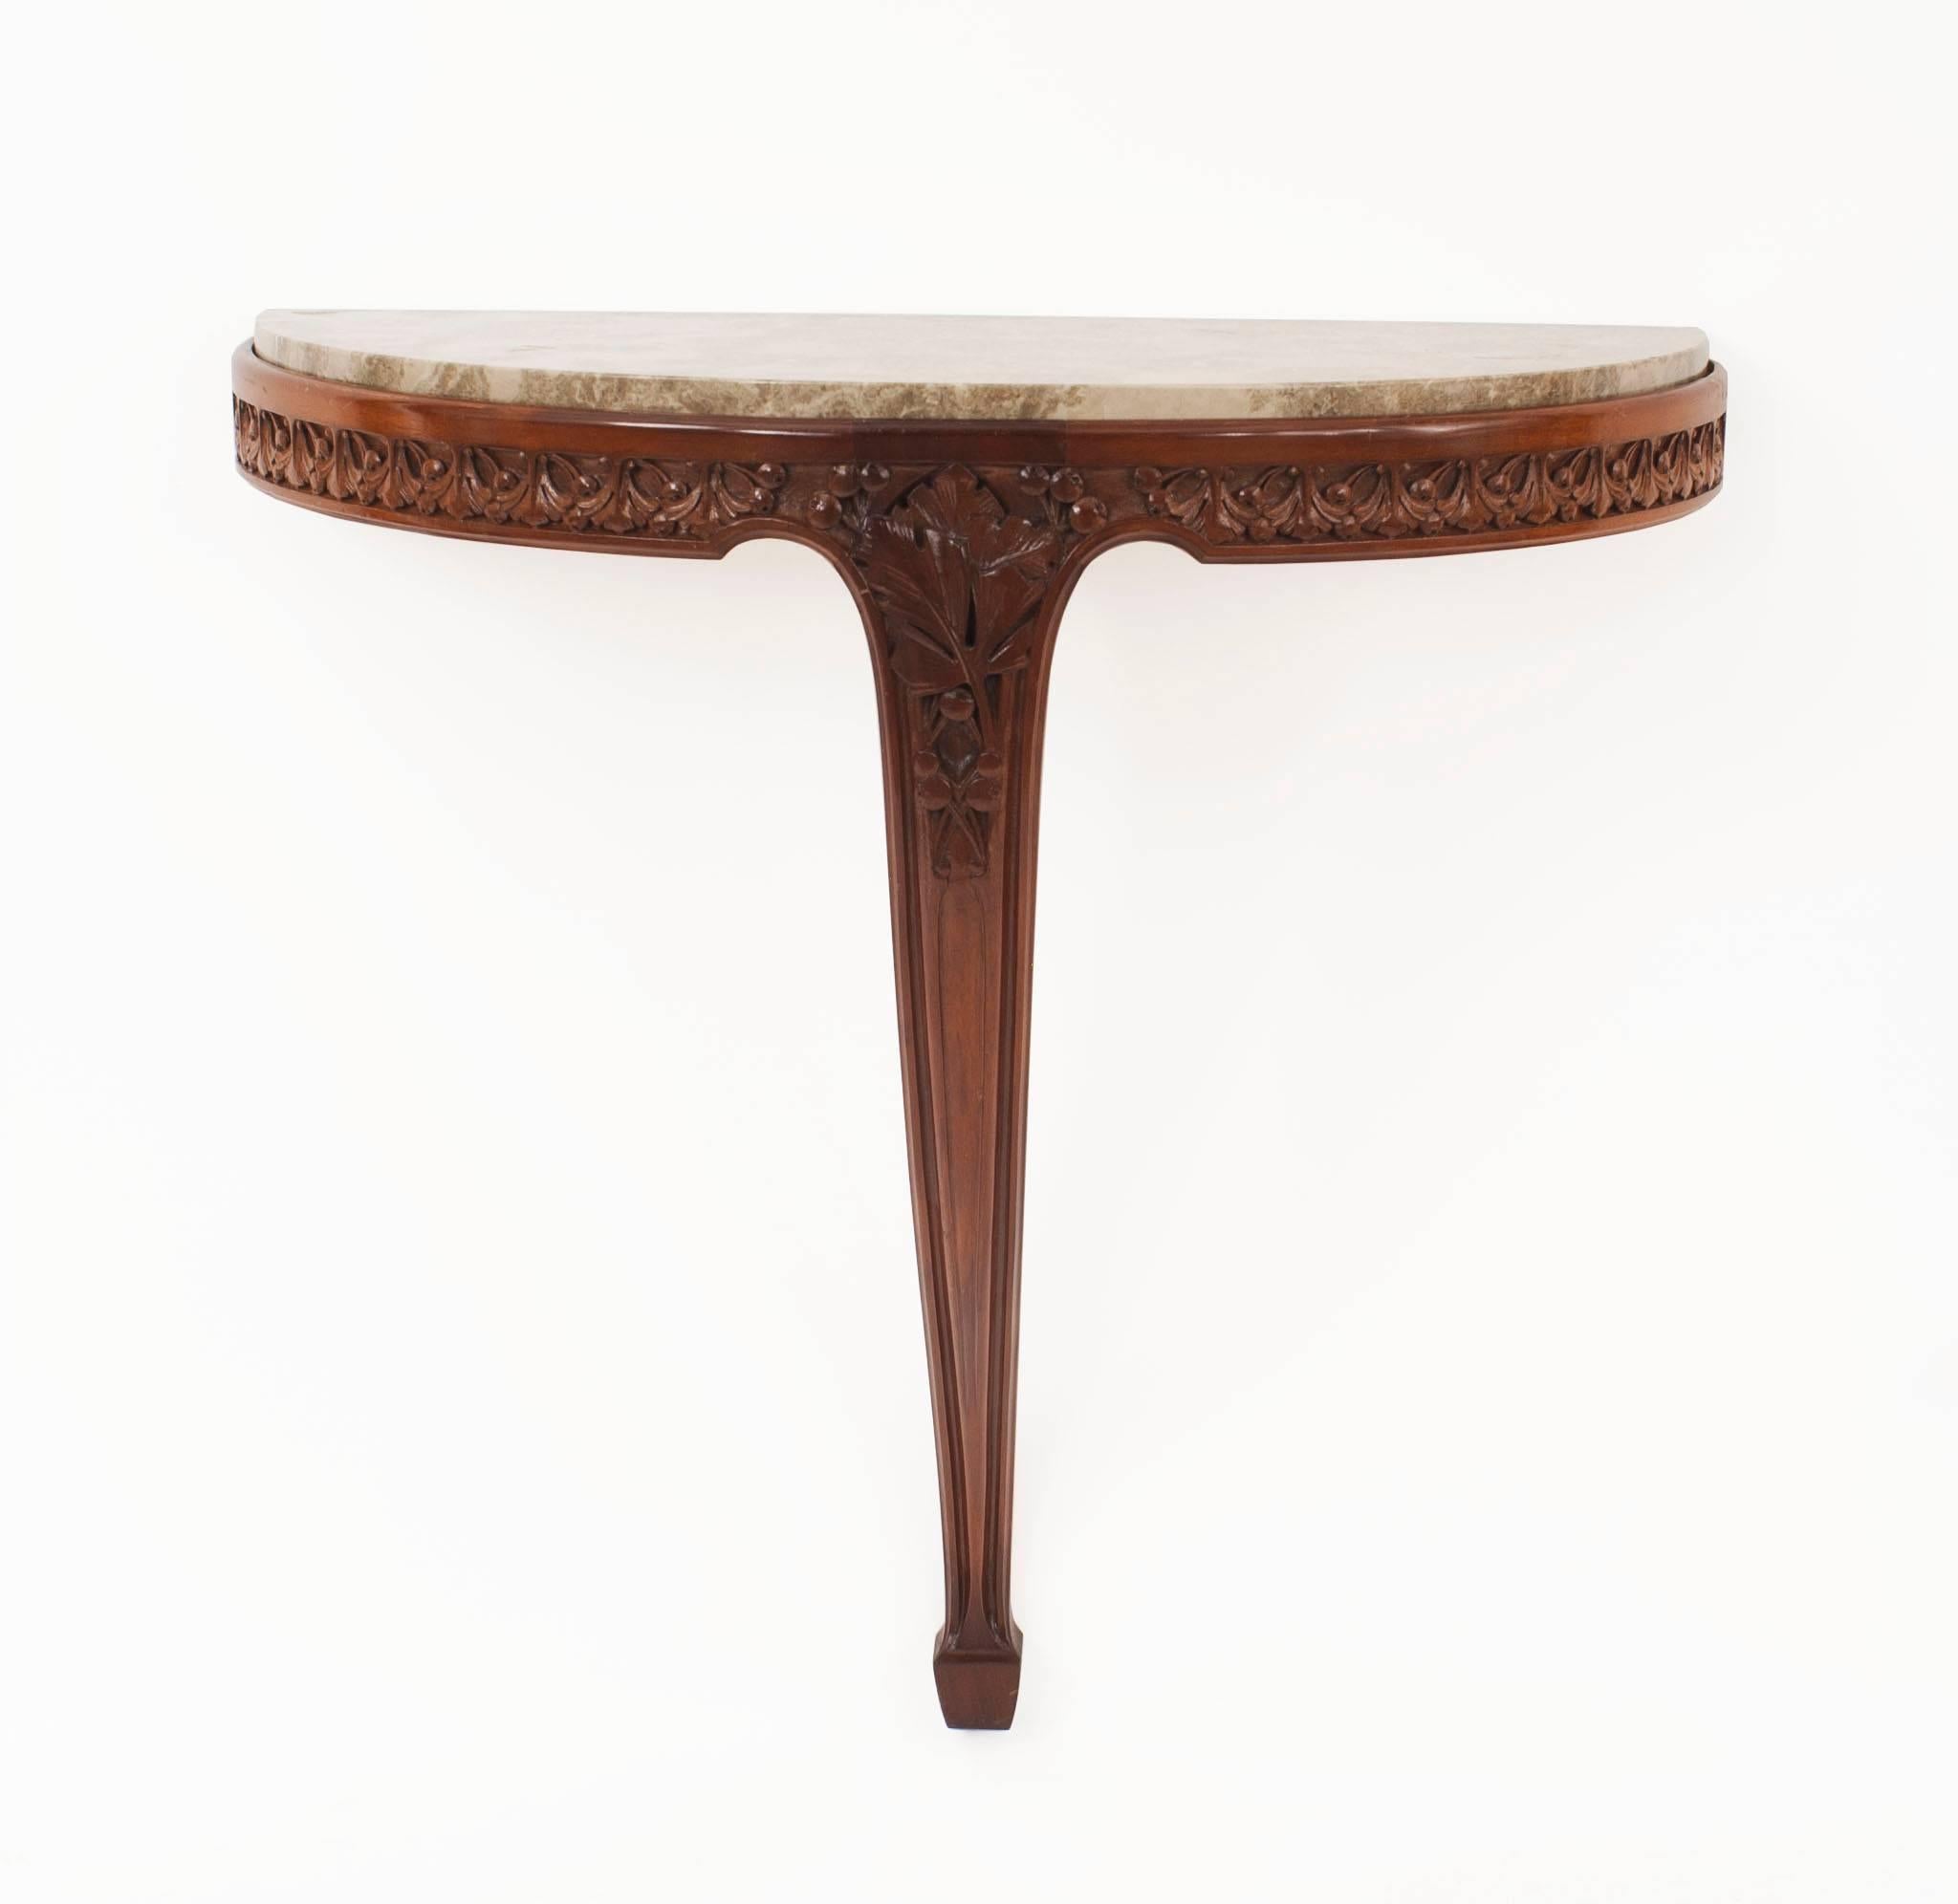 Pair of French Art Nouveau mahogany bracket console tables with a floral carved apron supported on a single leg with 